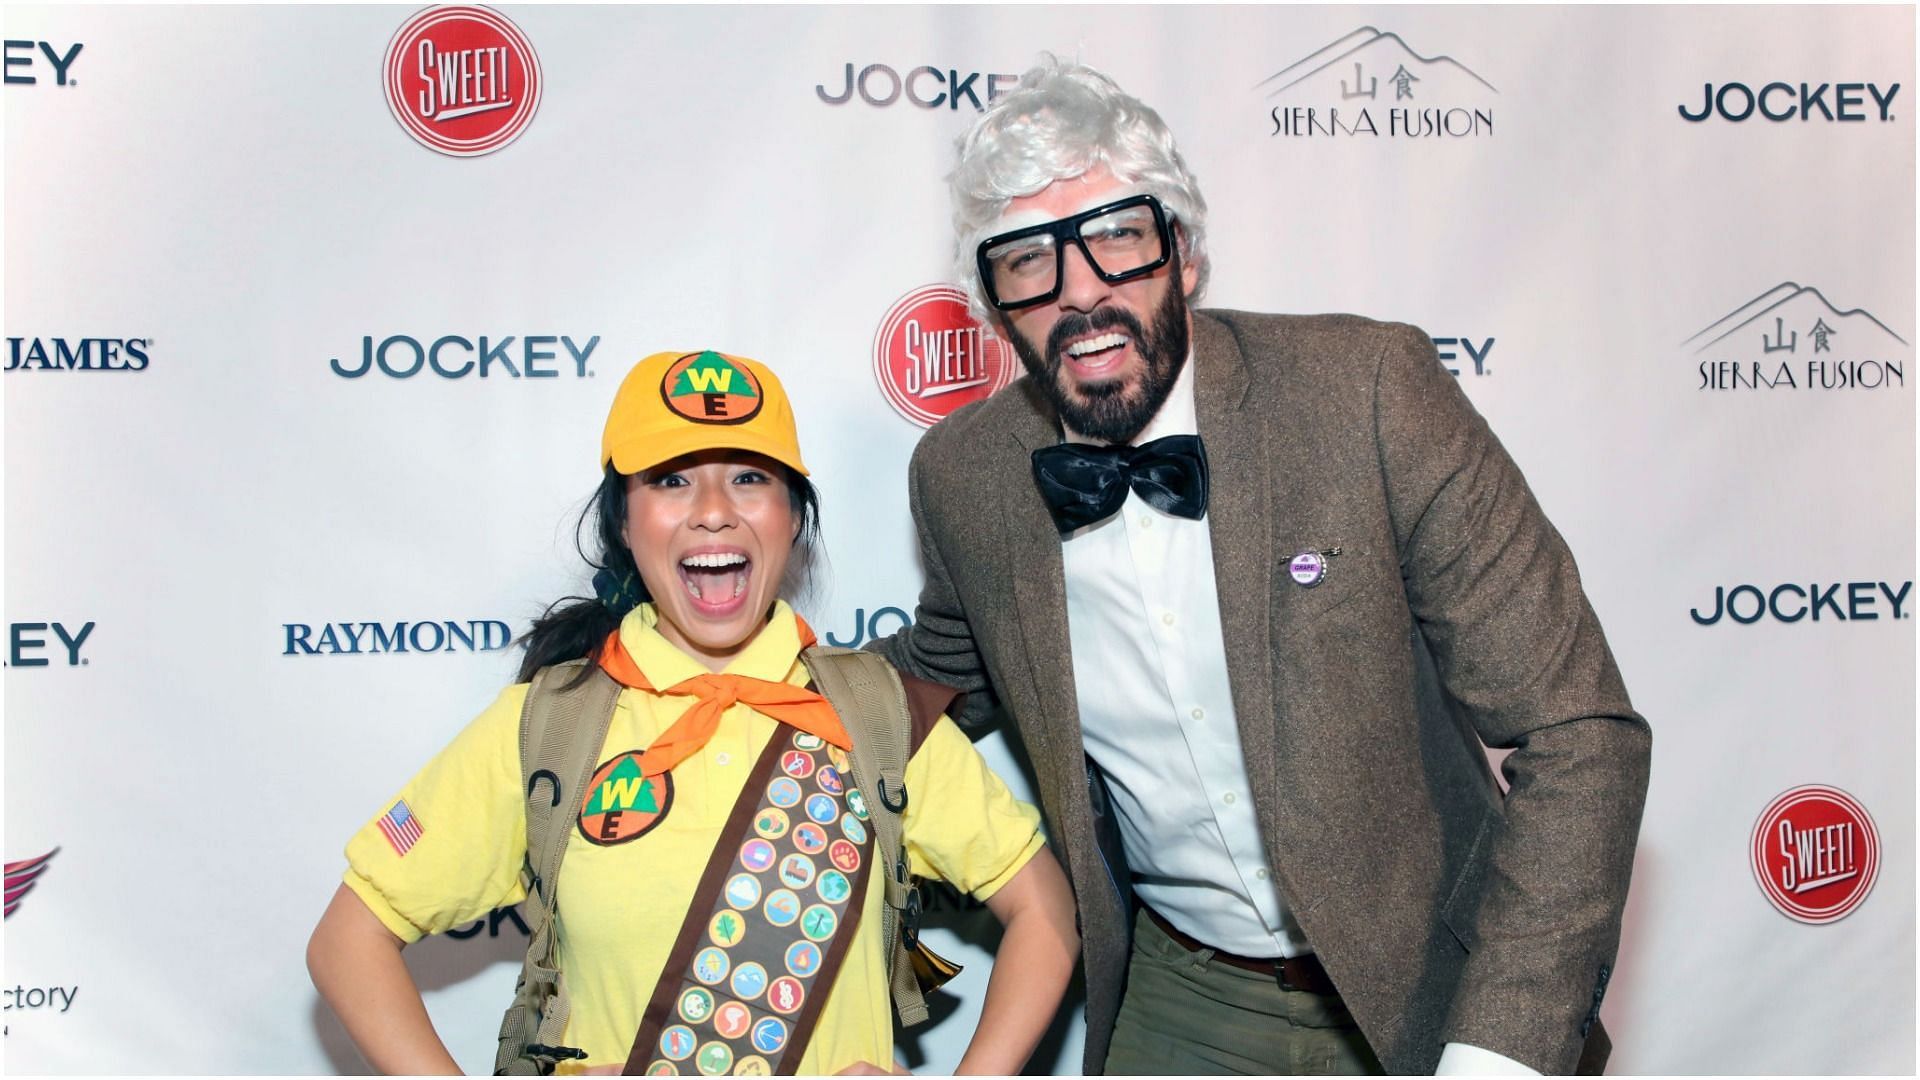 Drew Scott and Linda Phan attend Costumes For A Cause Gala (Image by Robin L Marshall via Getty Images)